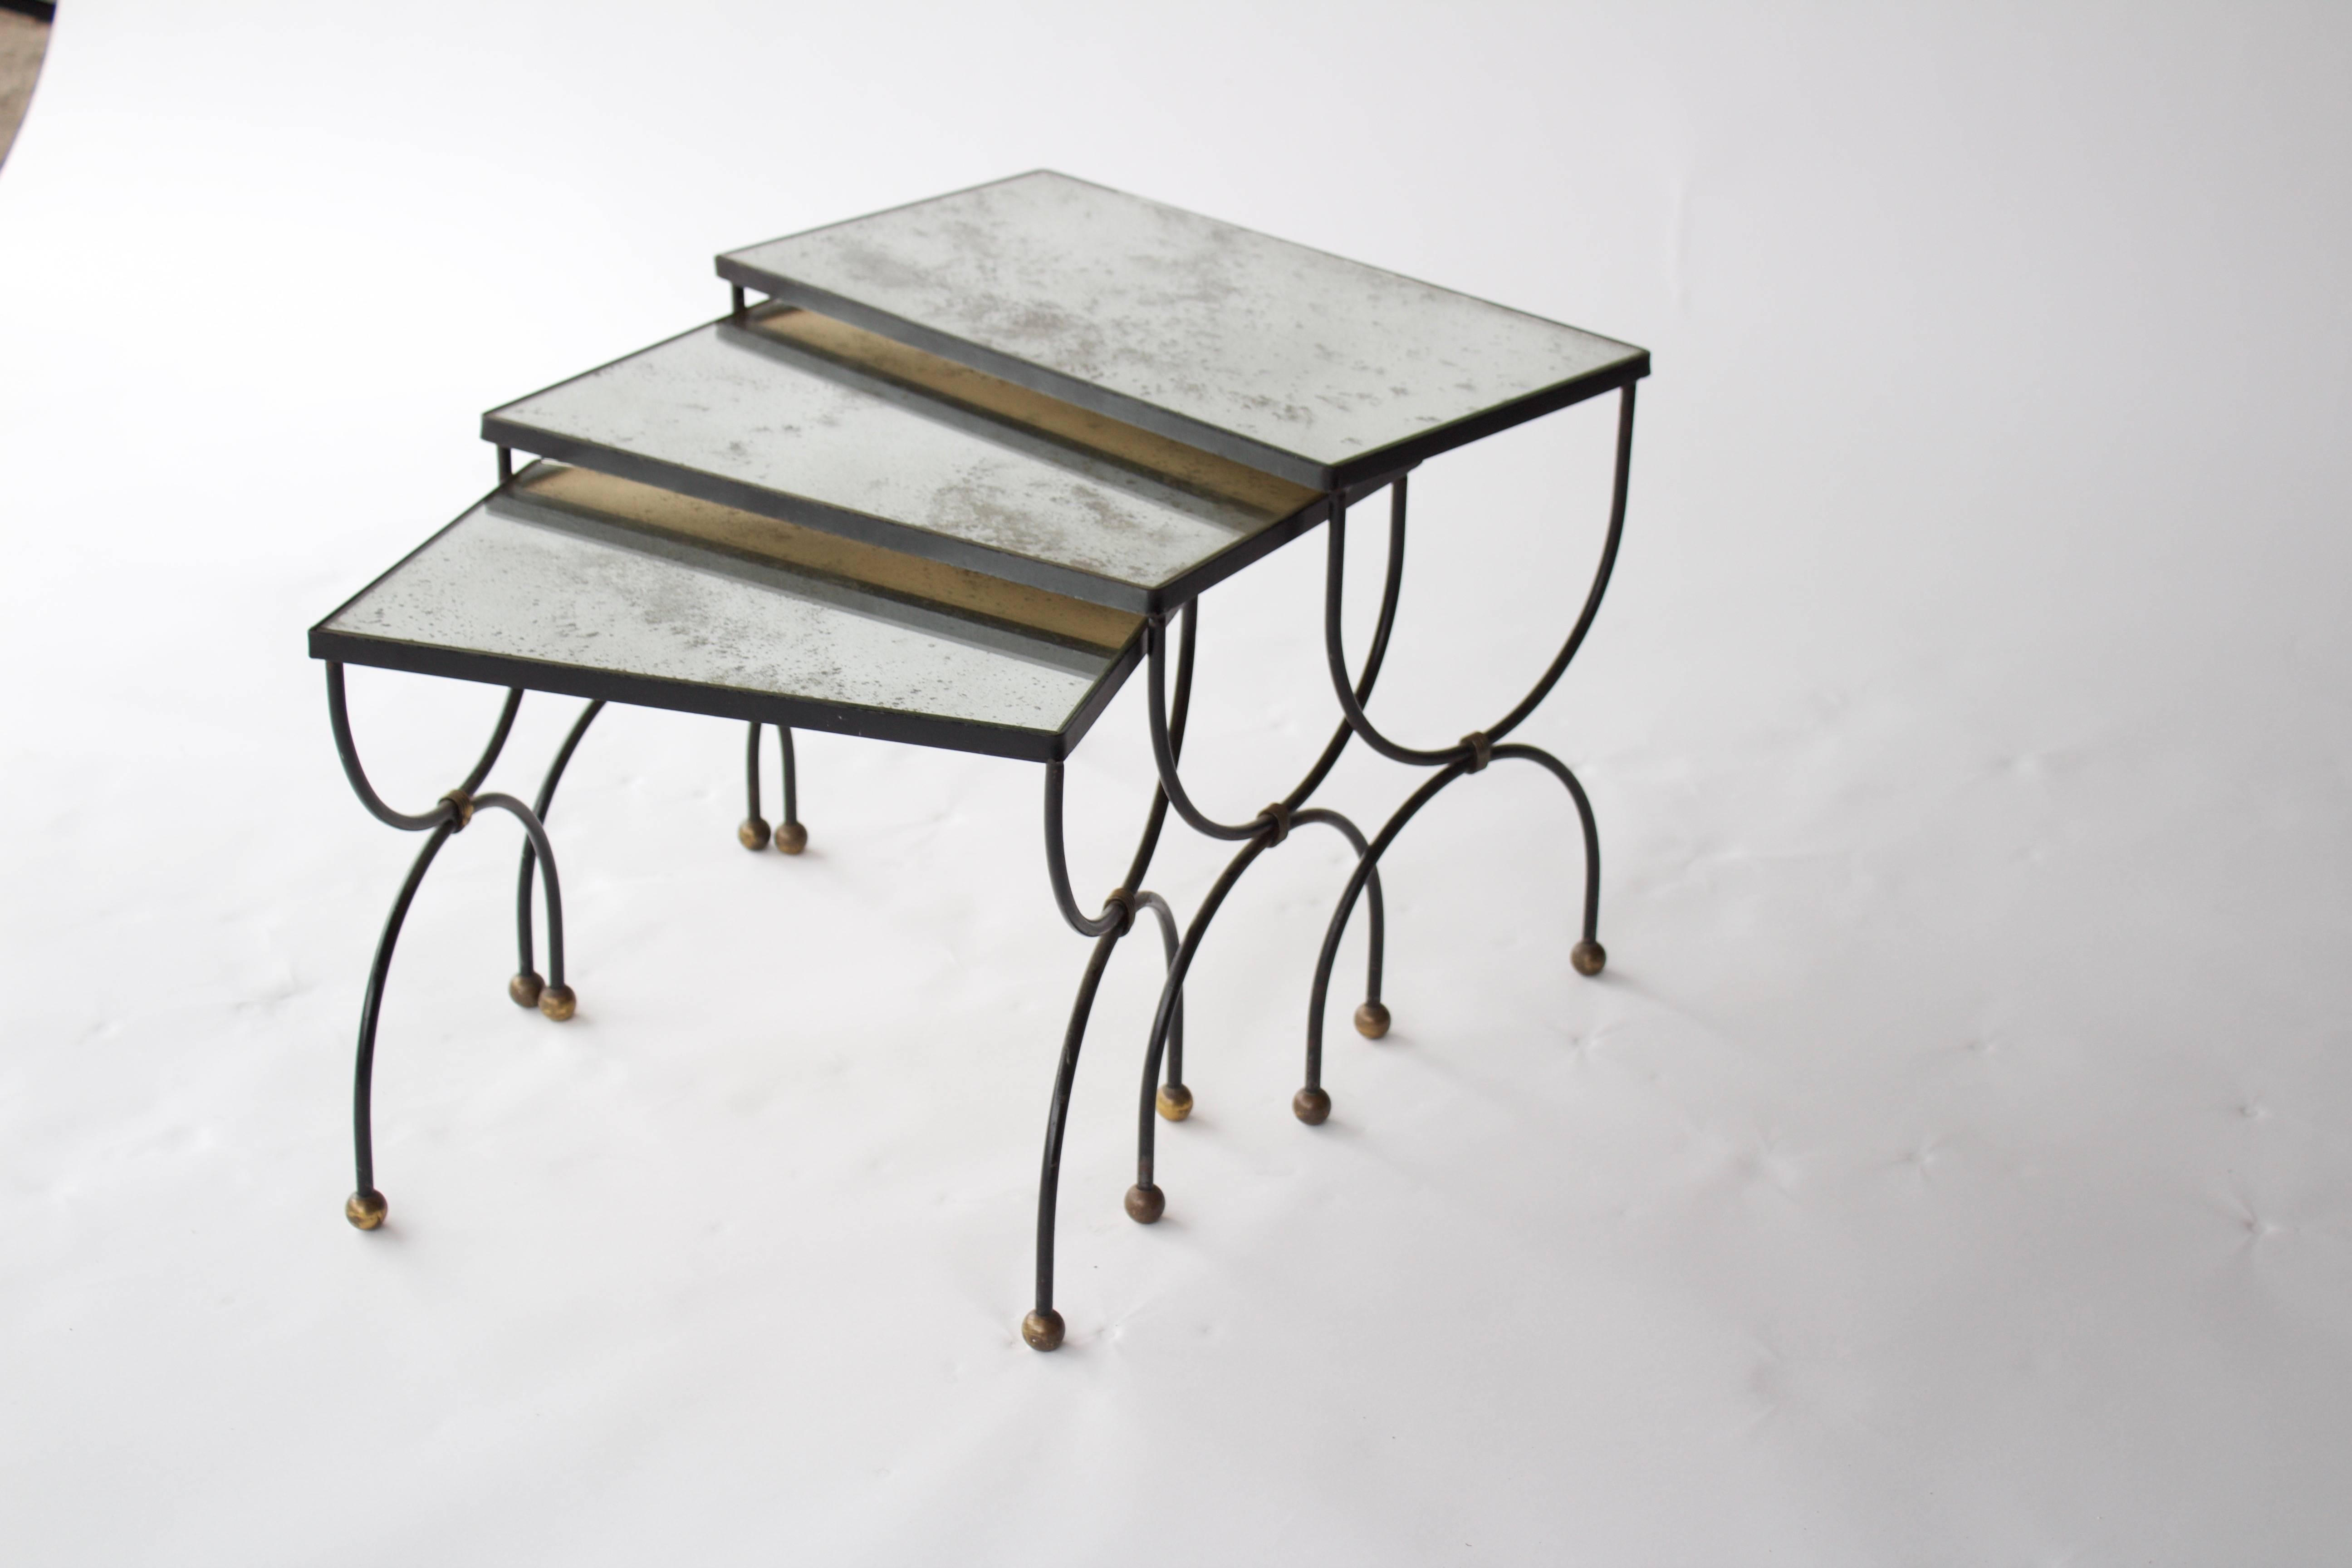 A set of three nesting tables from Mid-Century, France. Each table has an iron base, brass ball feet, and an antiqued mirror top.